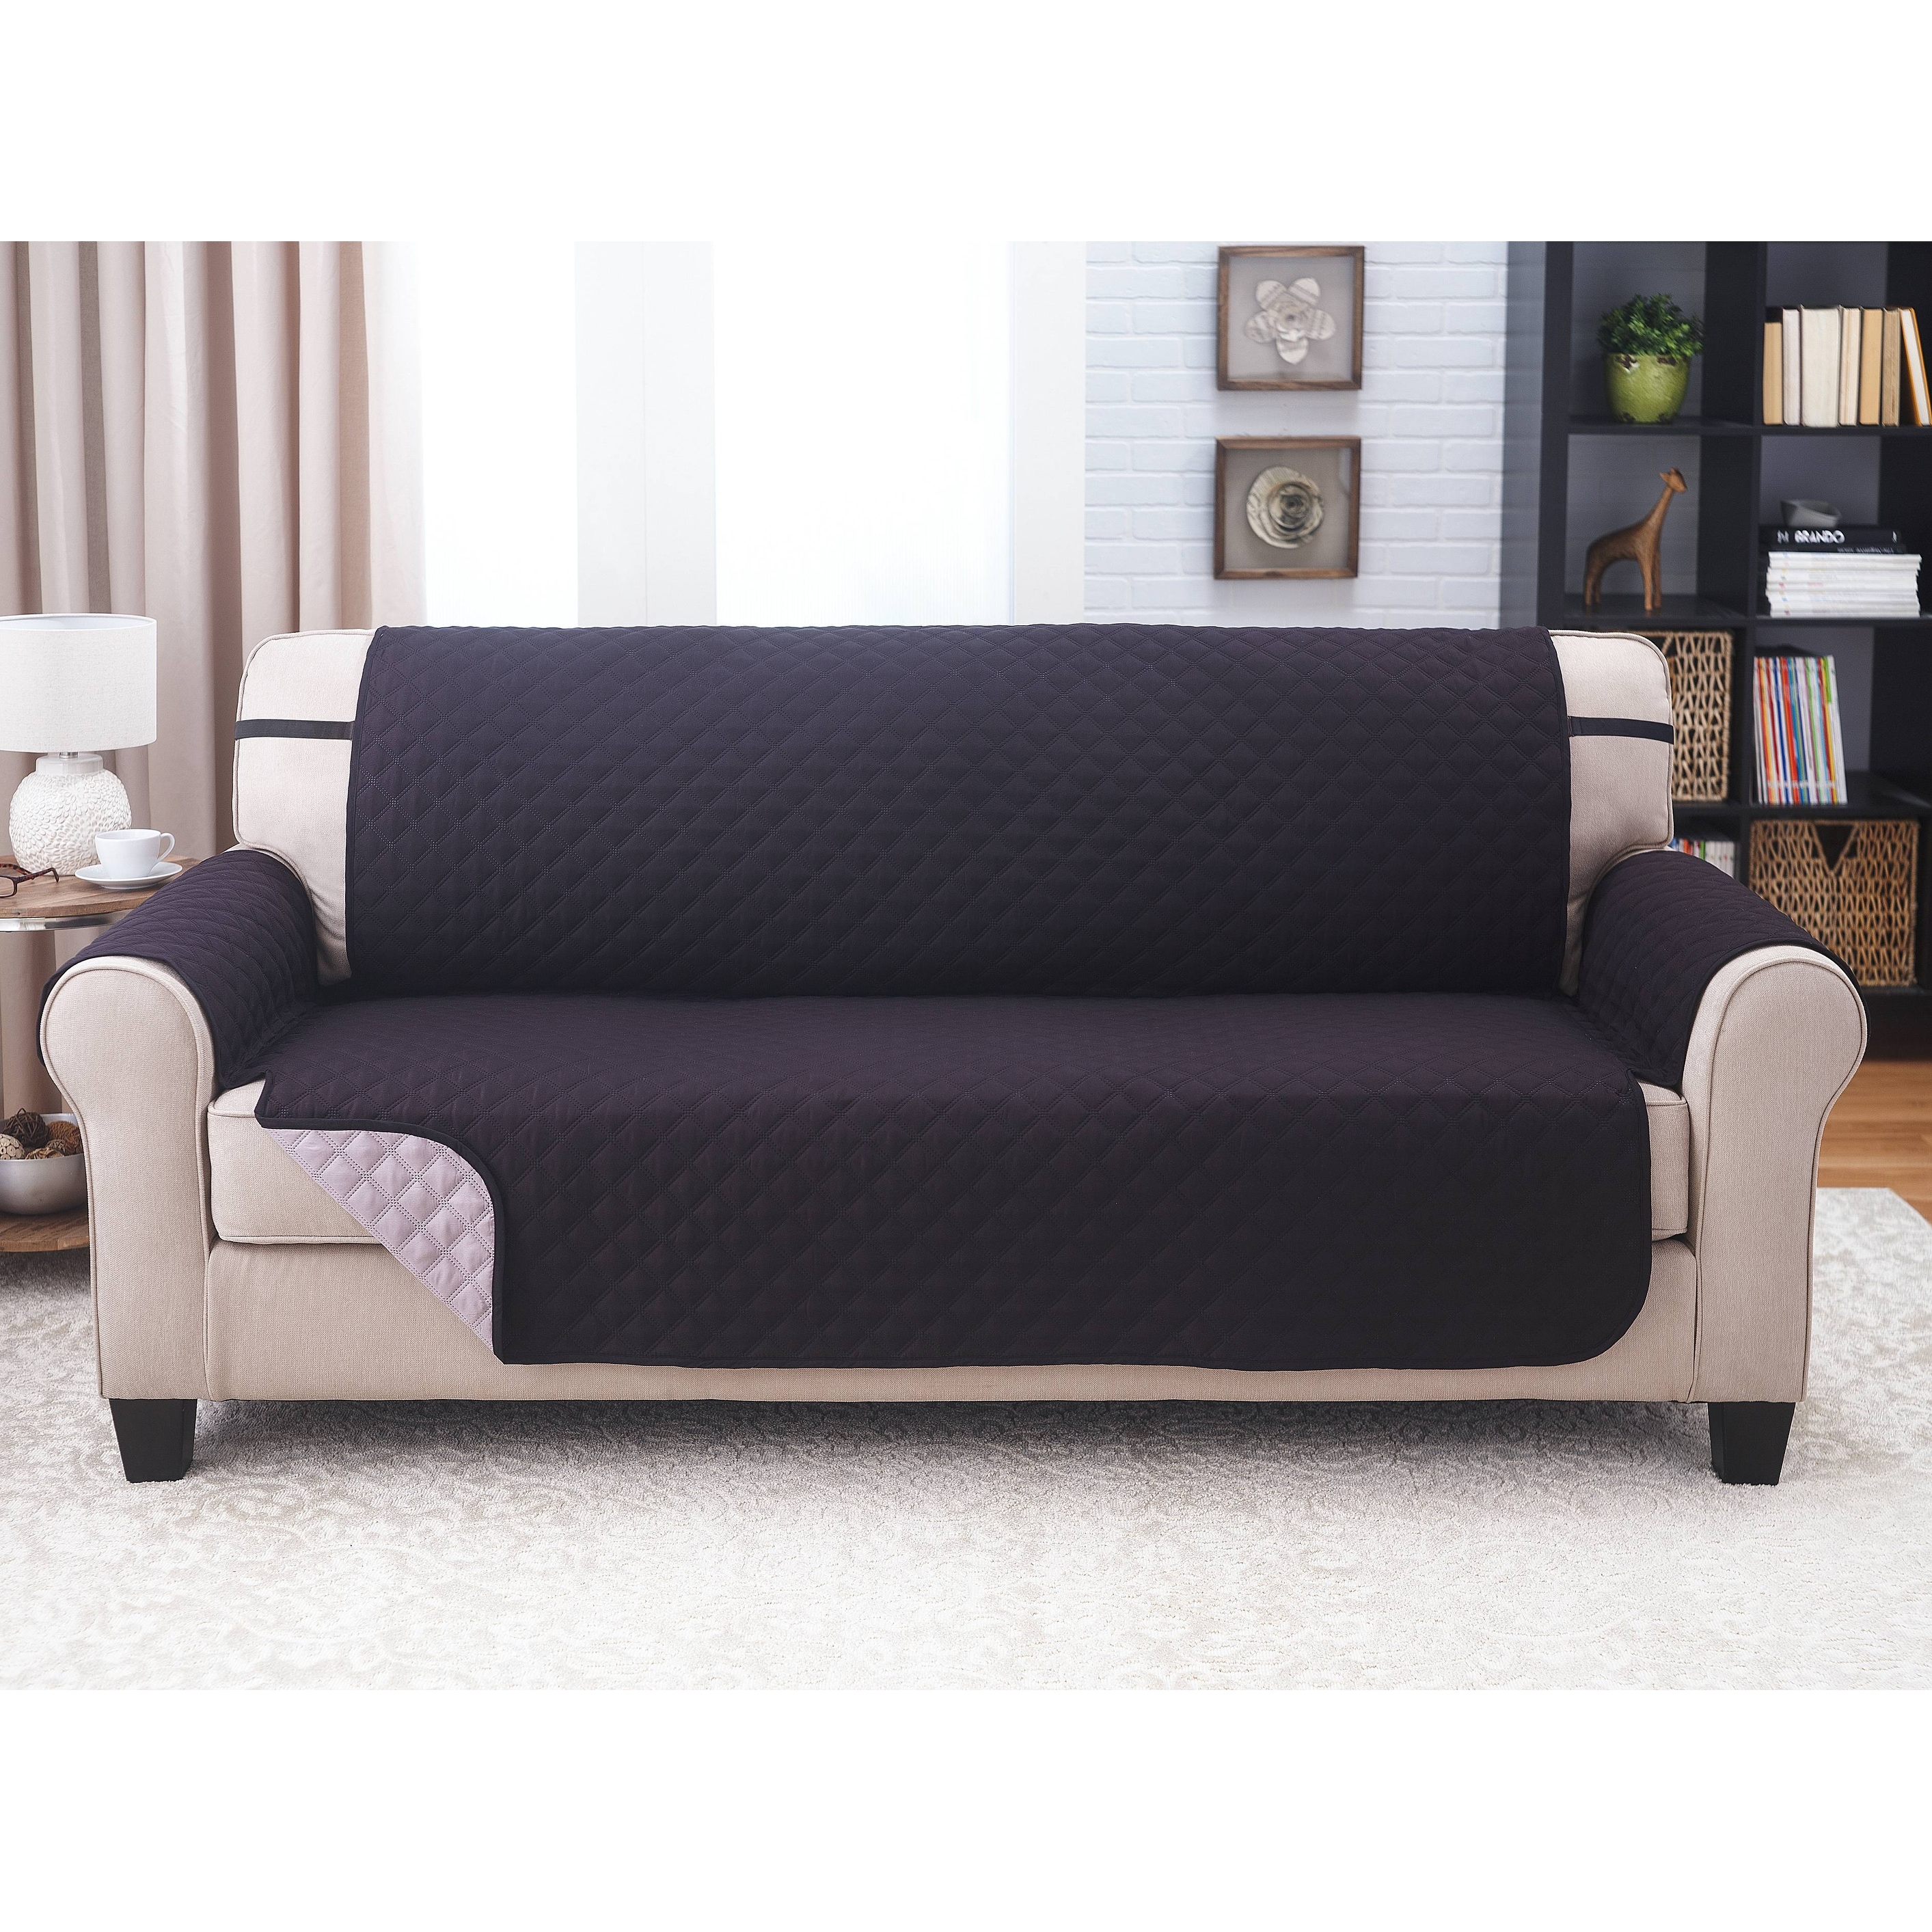 Seat Sofa Deluxe Reversible Loveseat Slipcover Furniture Protector Chair C... 